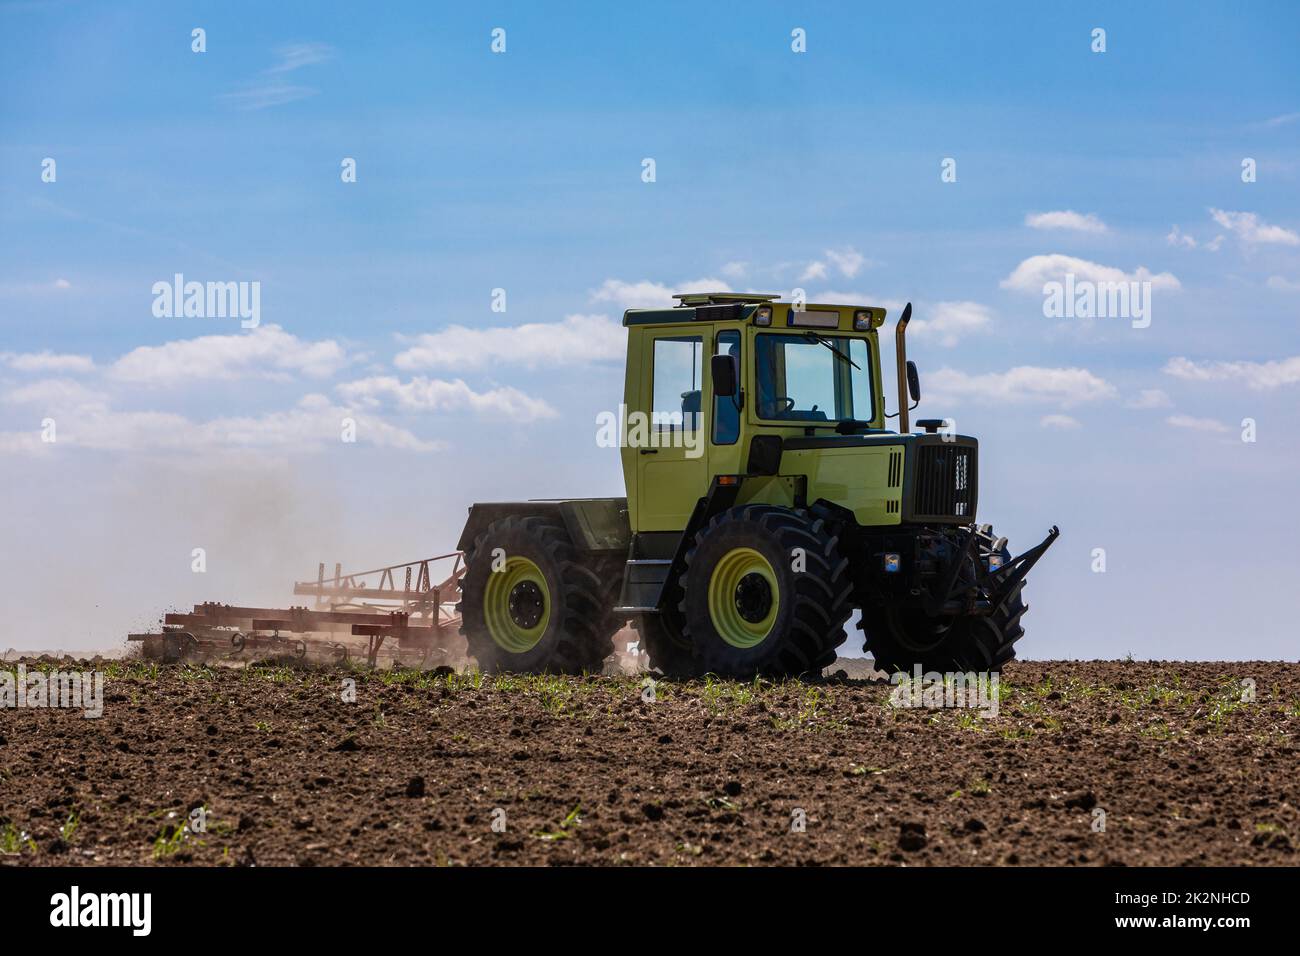 detail of a tractor preparing the field with machinery Stock Photo